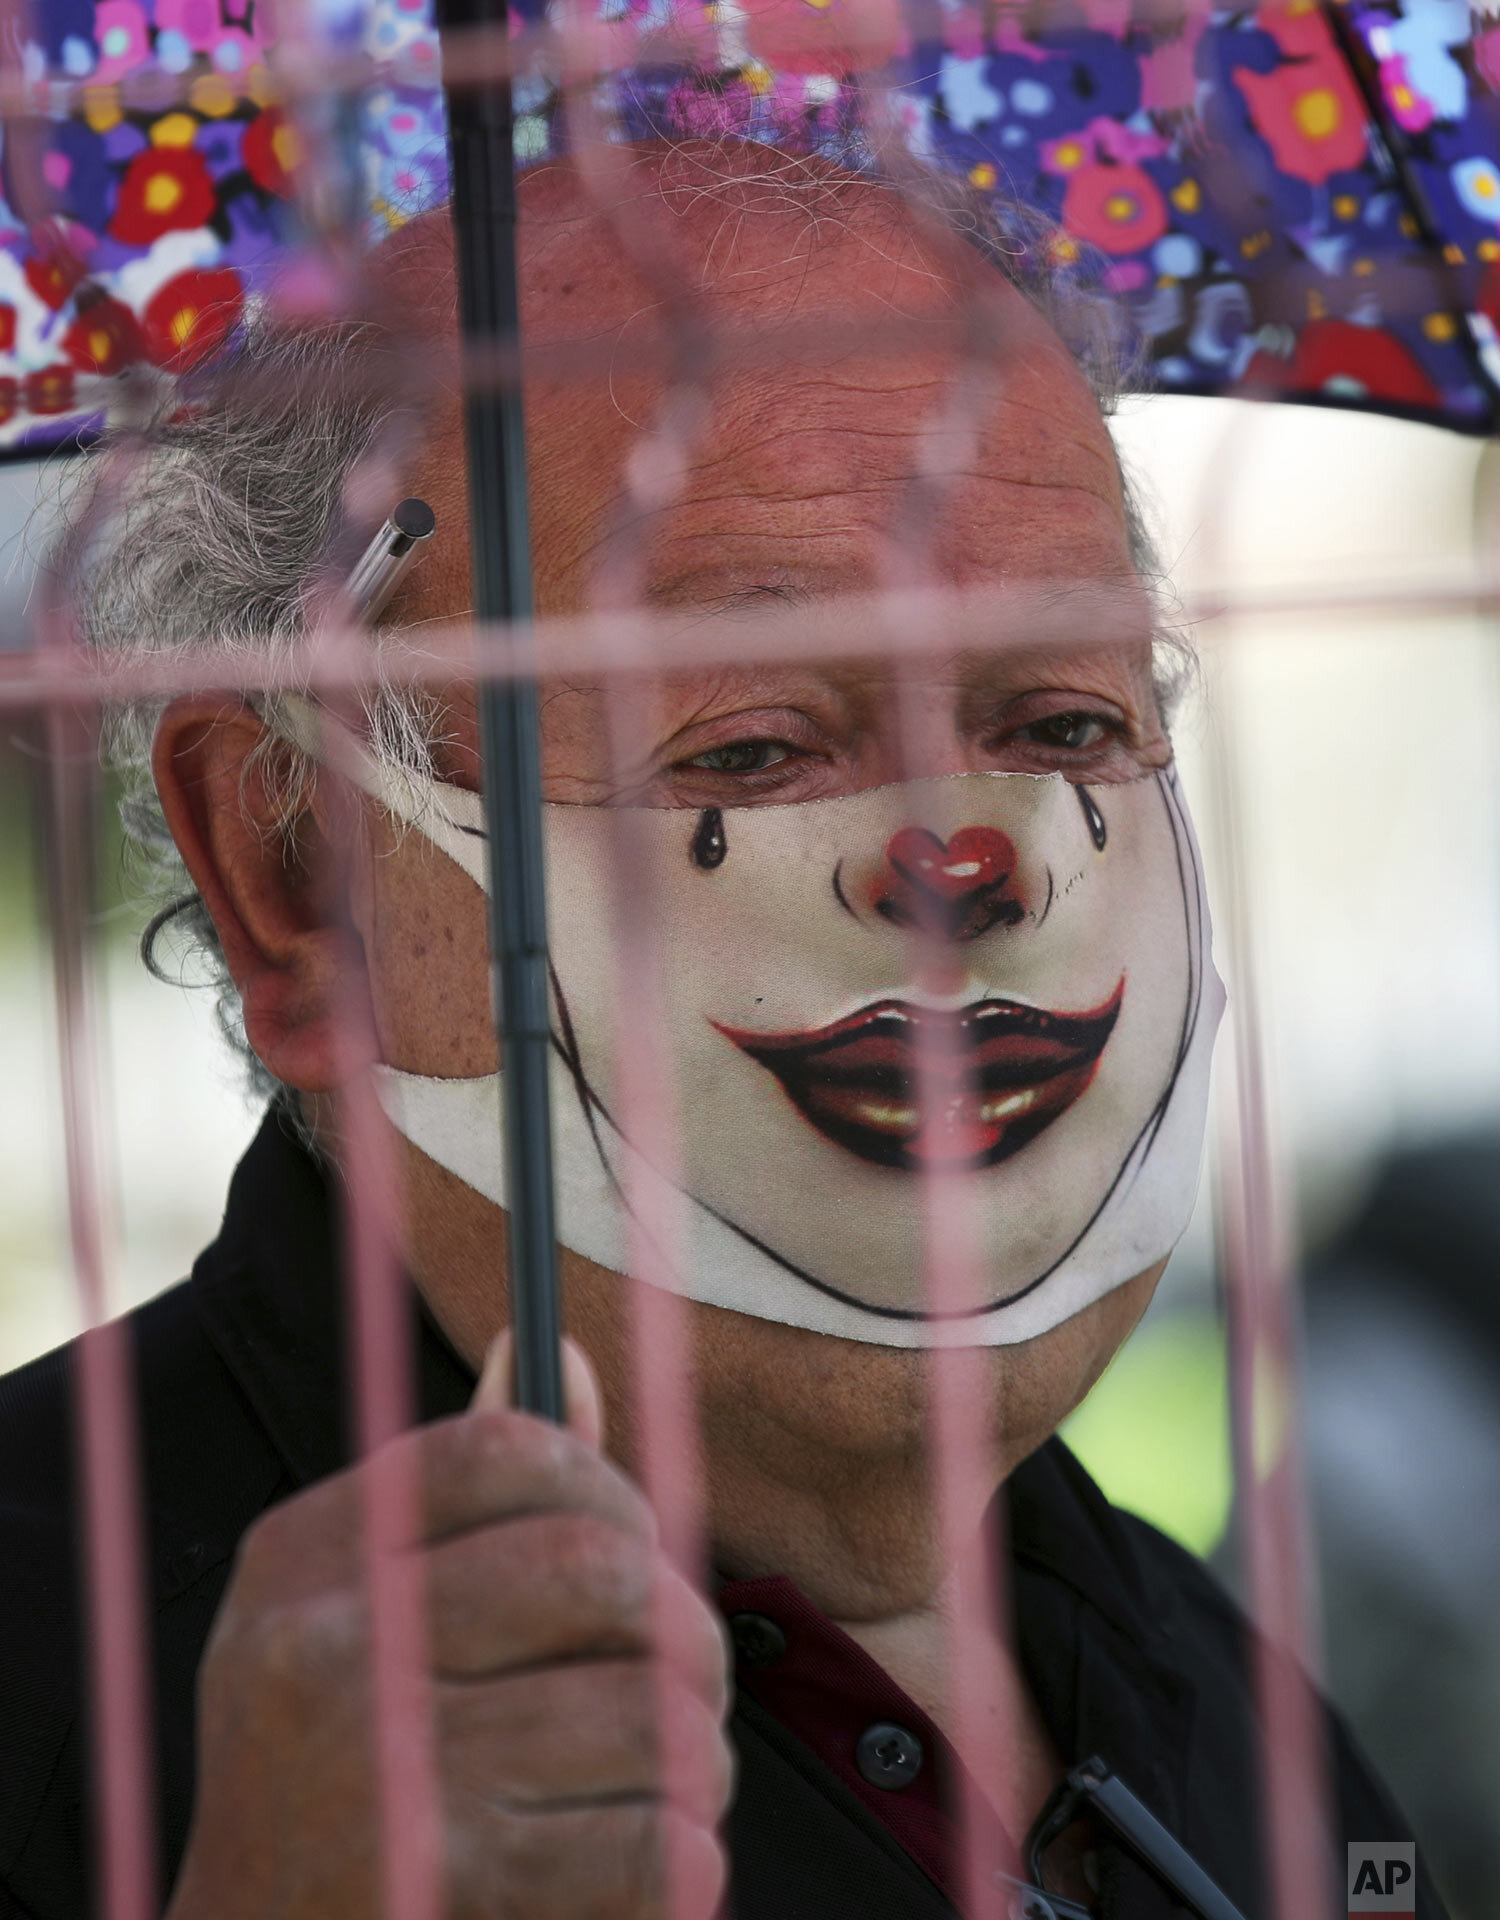  An elderly man with a mask painted as a clown waits in line for his dose of the Sinovac COVID-19 vaccine at a sports center in Ecatepec, a borough on the outskirts of Mexico City, Feb. 23, 2021. (Foto AP/Marco Ugarte 